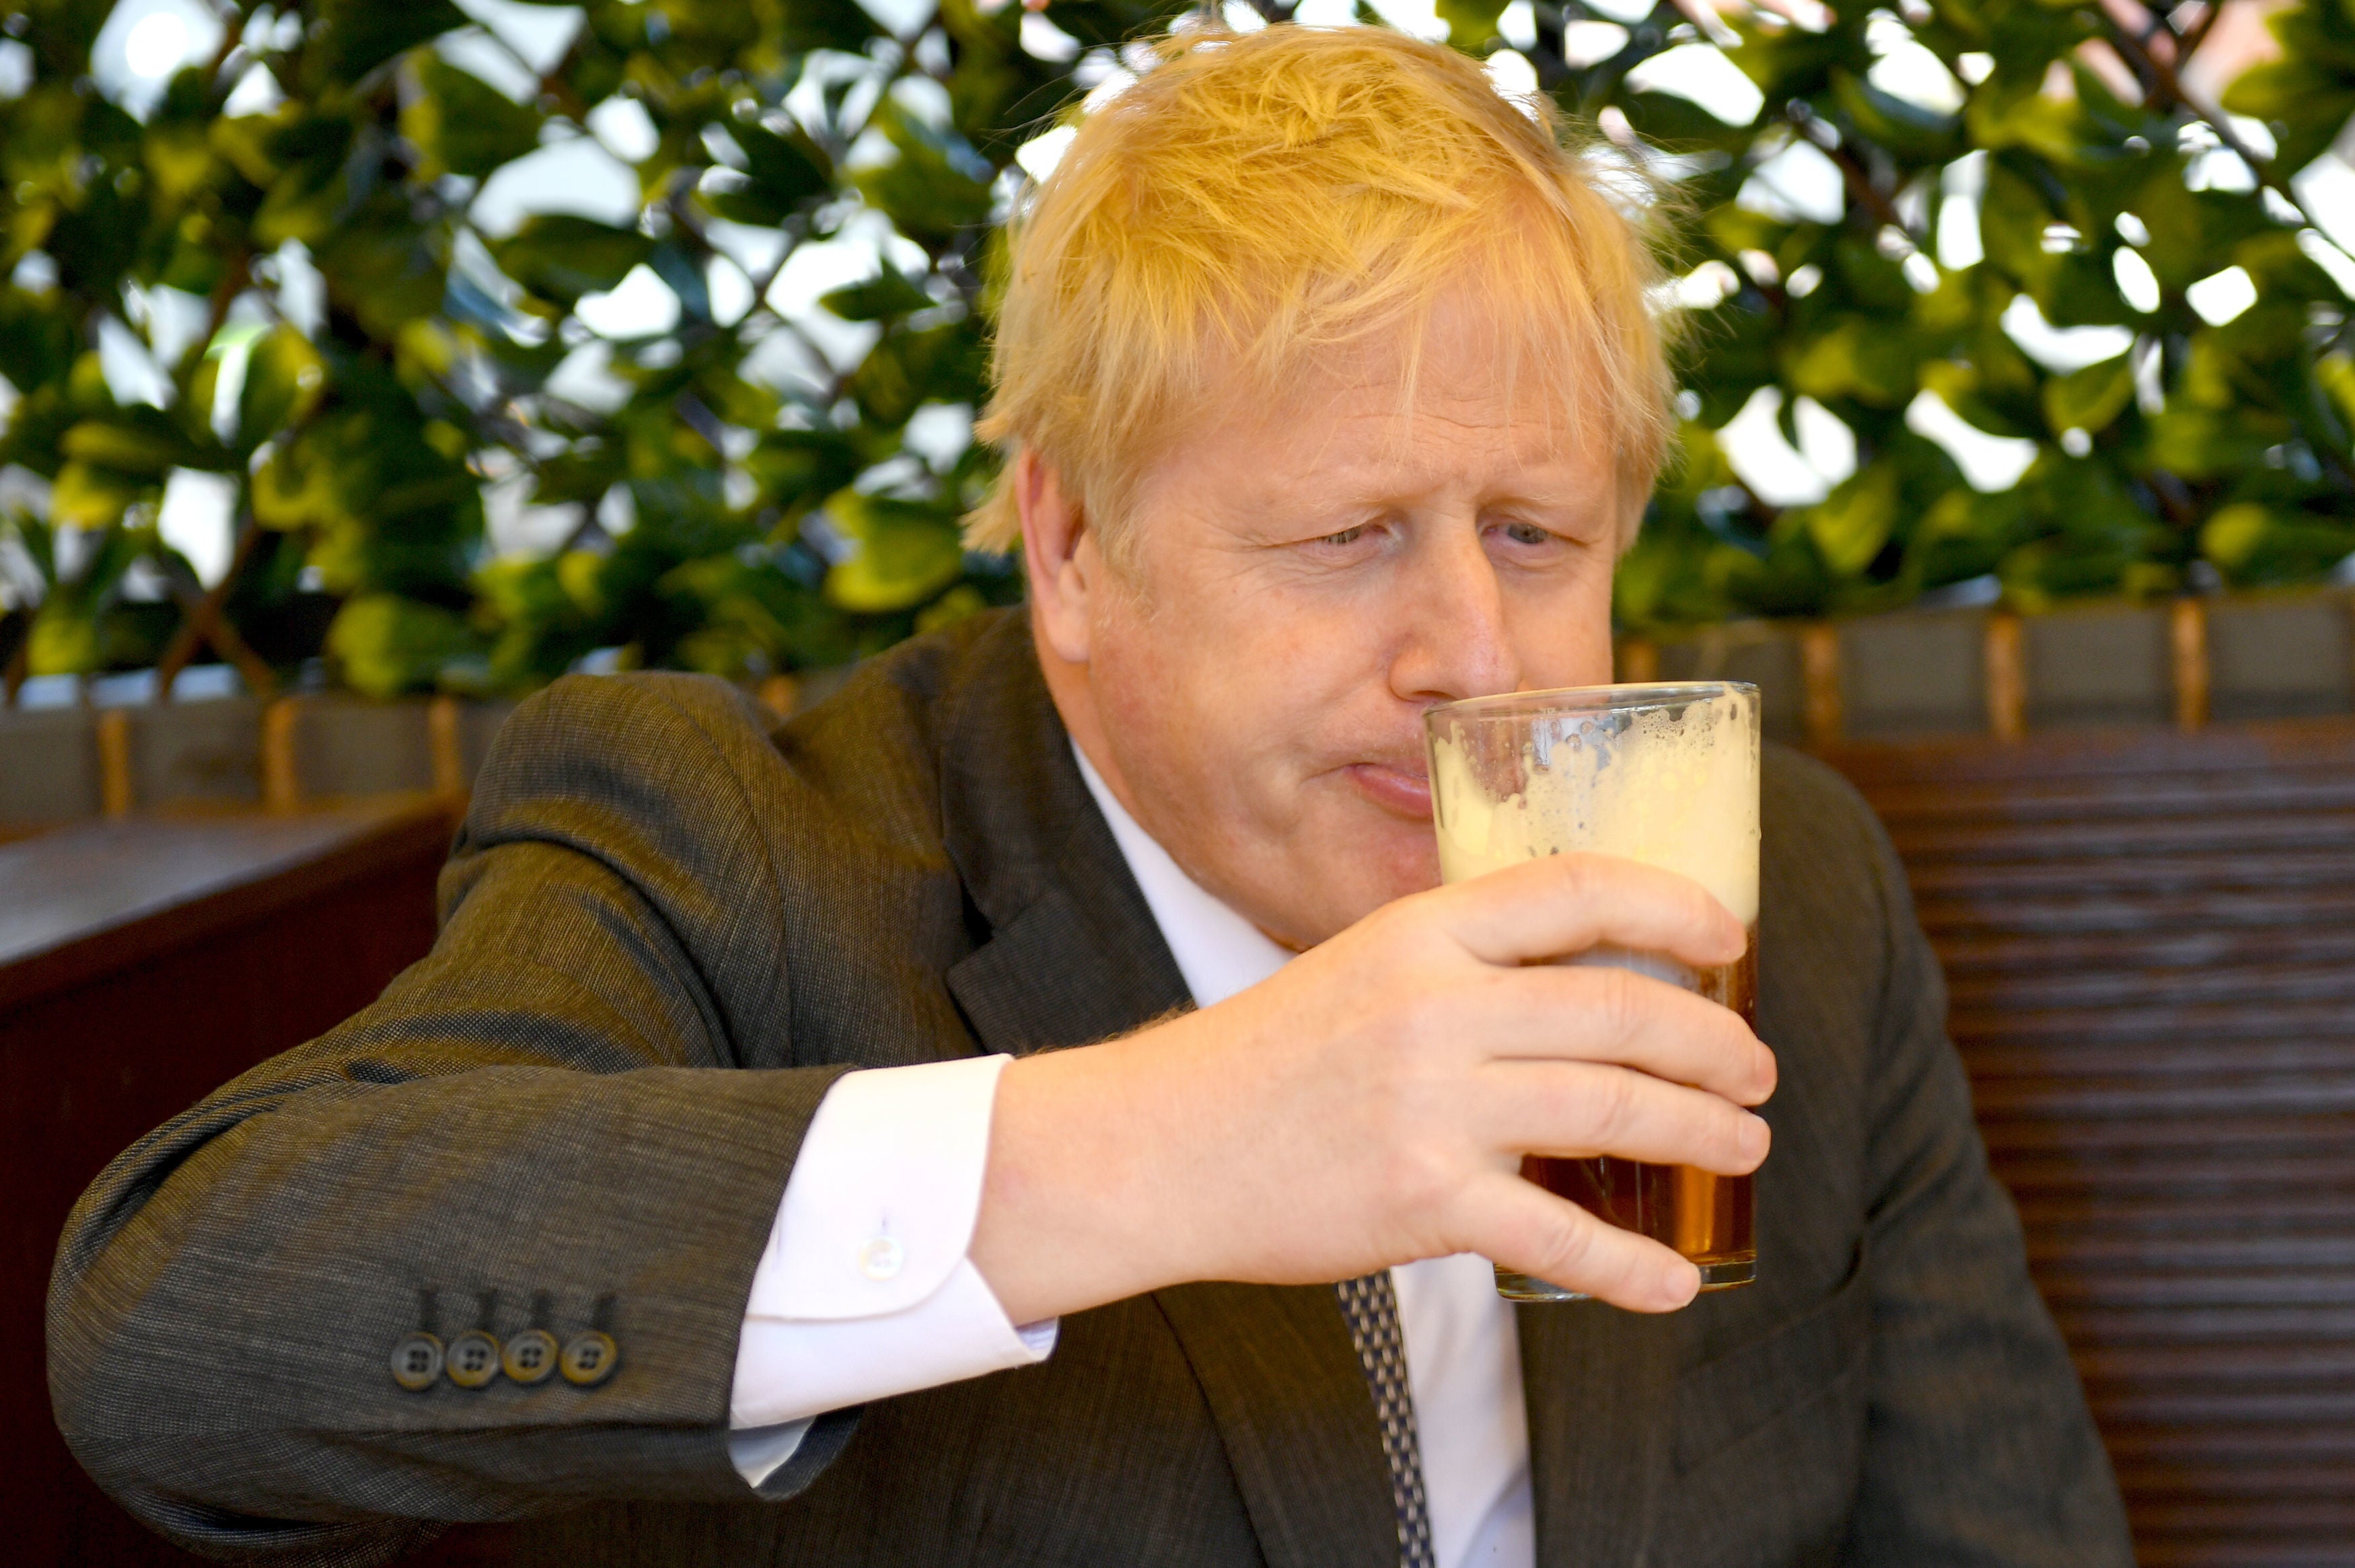 The prime minister enjoys a pint during a visit to Wolverhampton